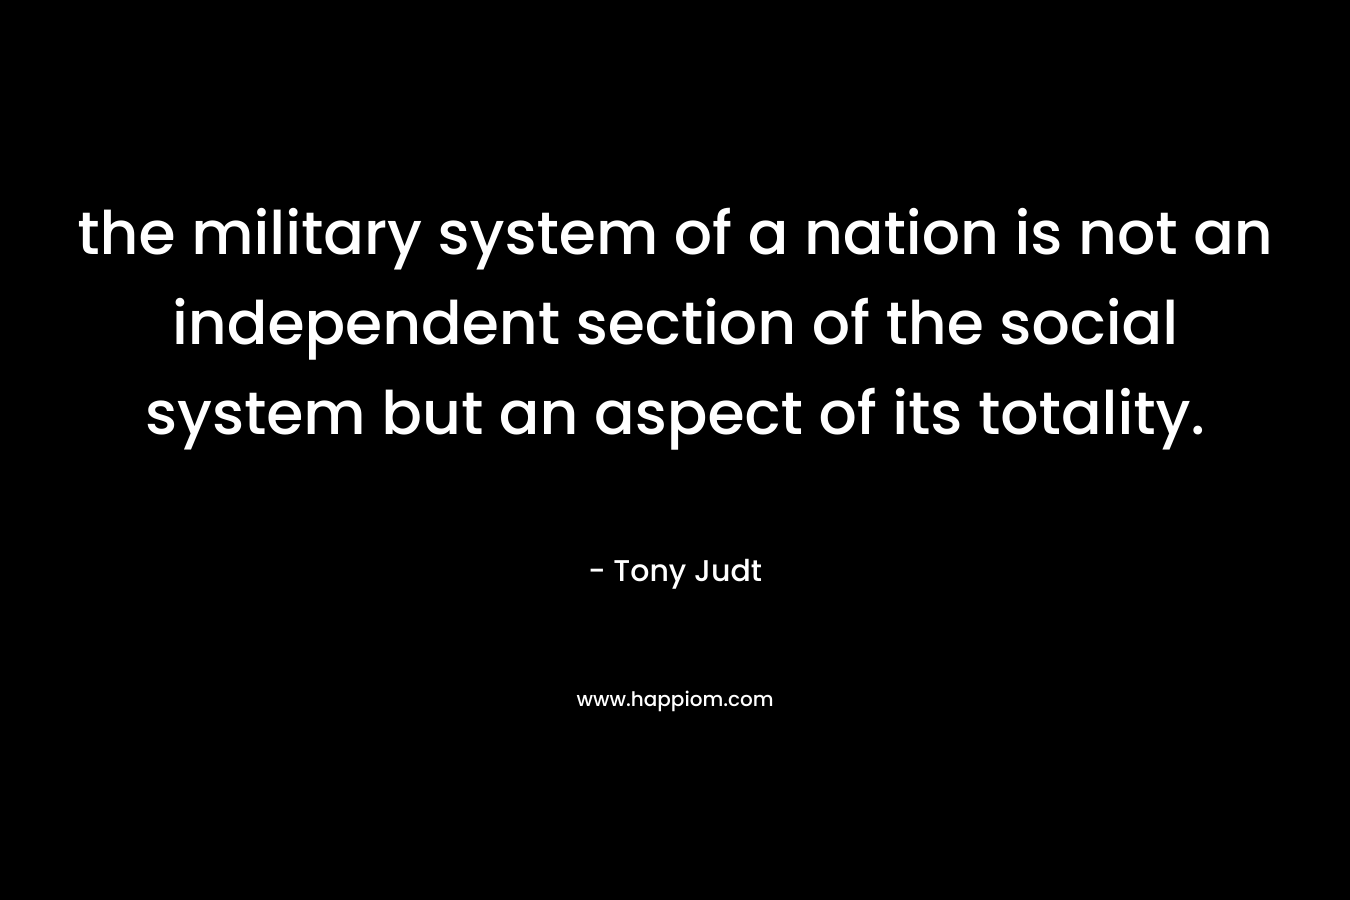 the military system of a nation is not an independent section of the social system but an aspect of its totality.